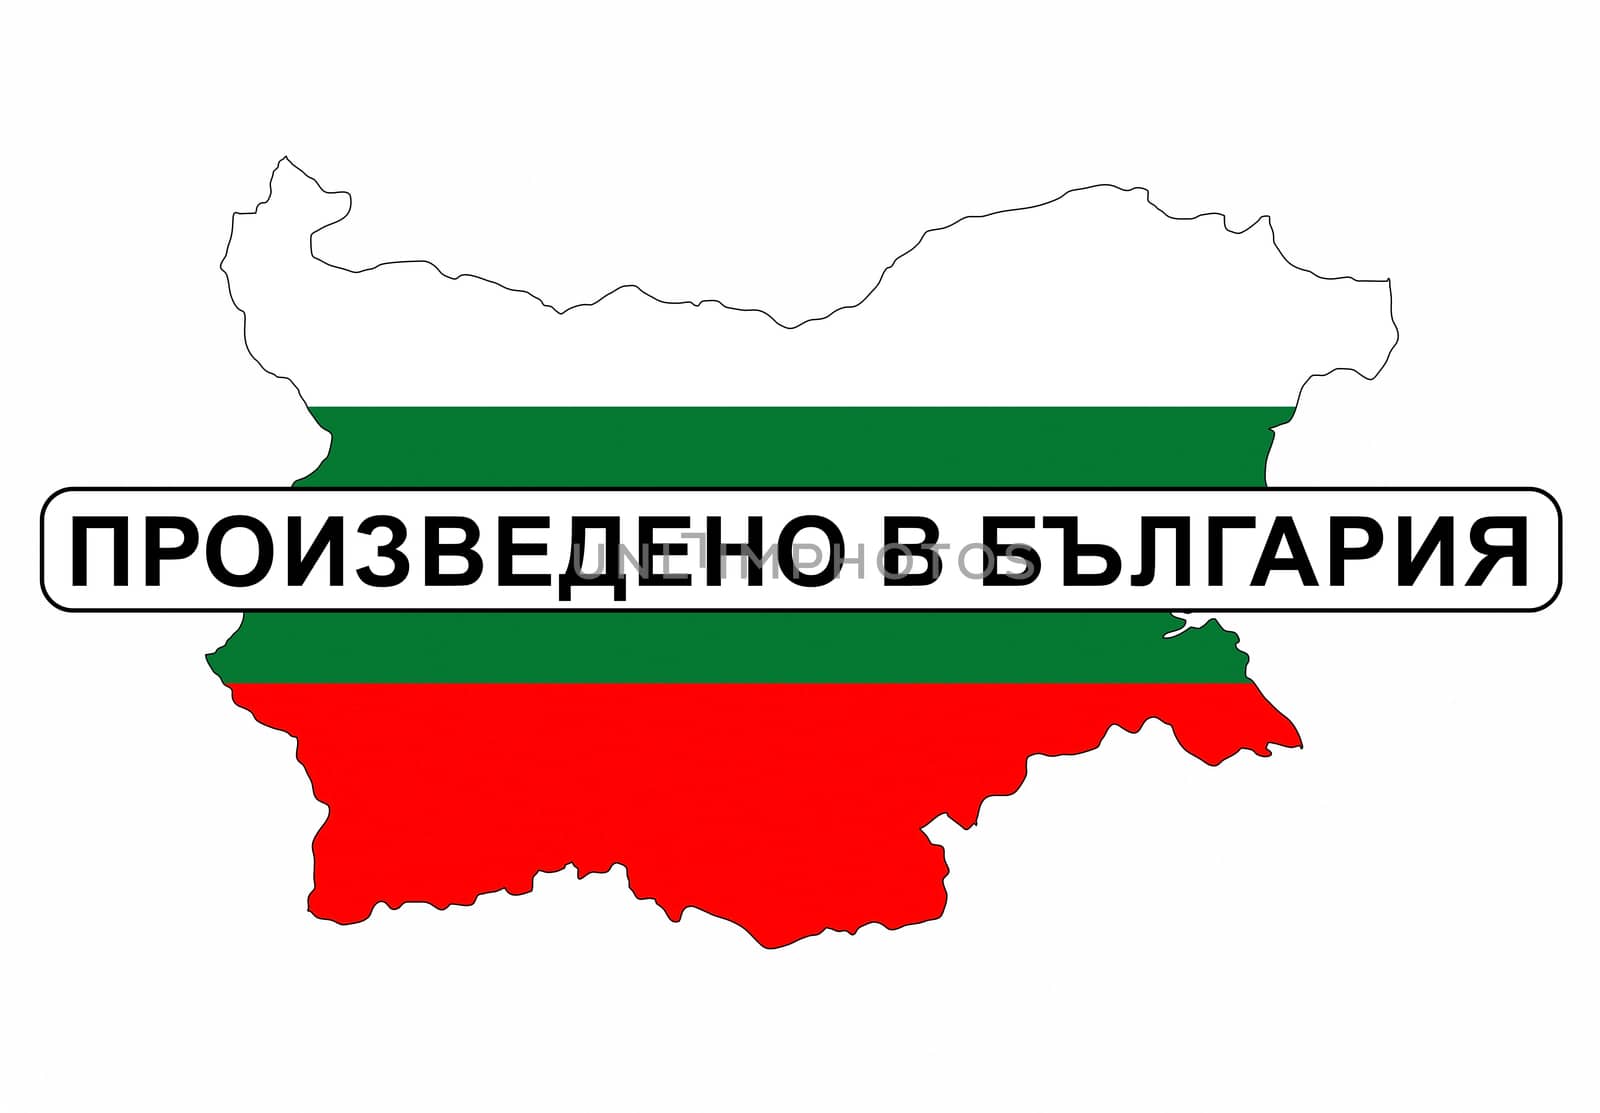 made in bulgaria country national flag map shape with text